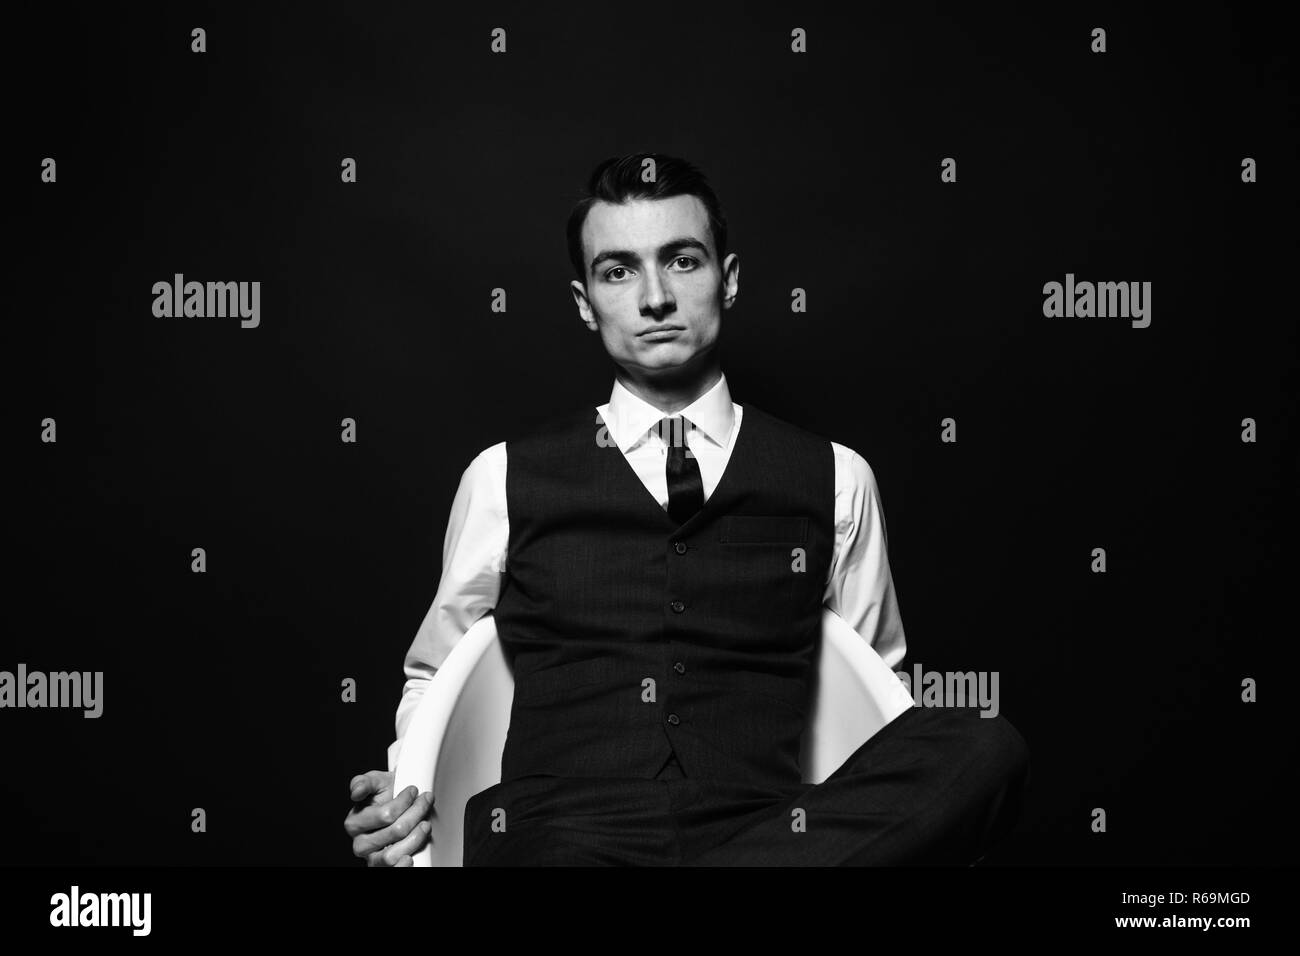 Close up black and white portrait of a young man in a white shirt, black tie and vest, sitting and seriously looking at the camera, against plain stud Stock Photo